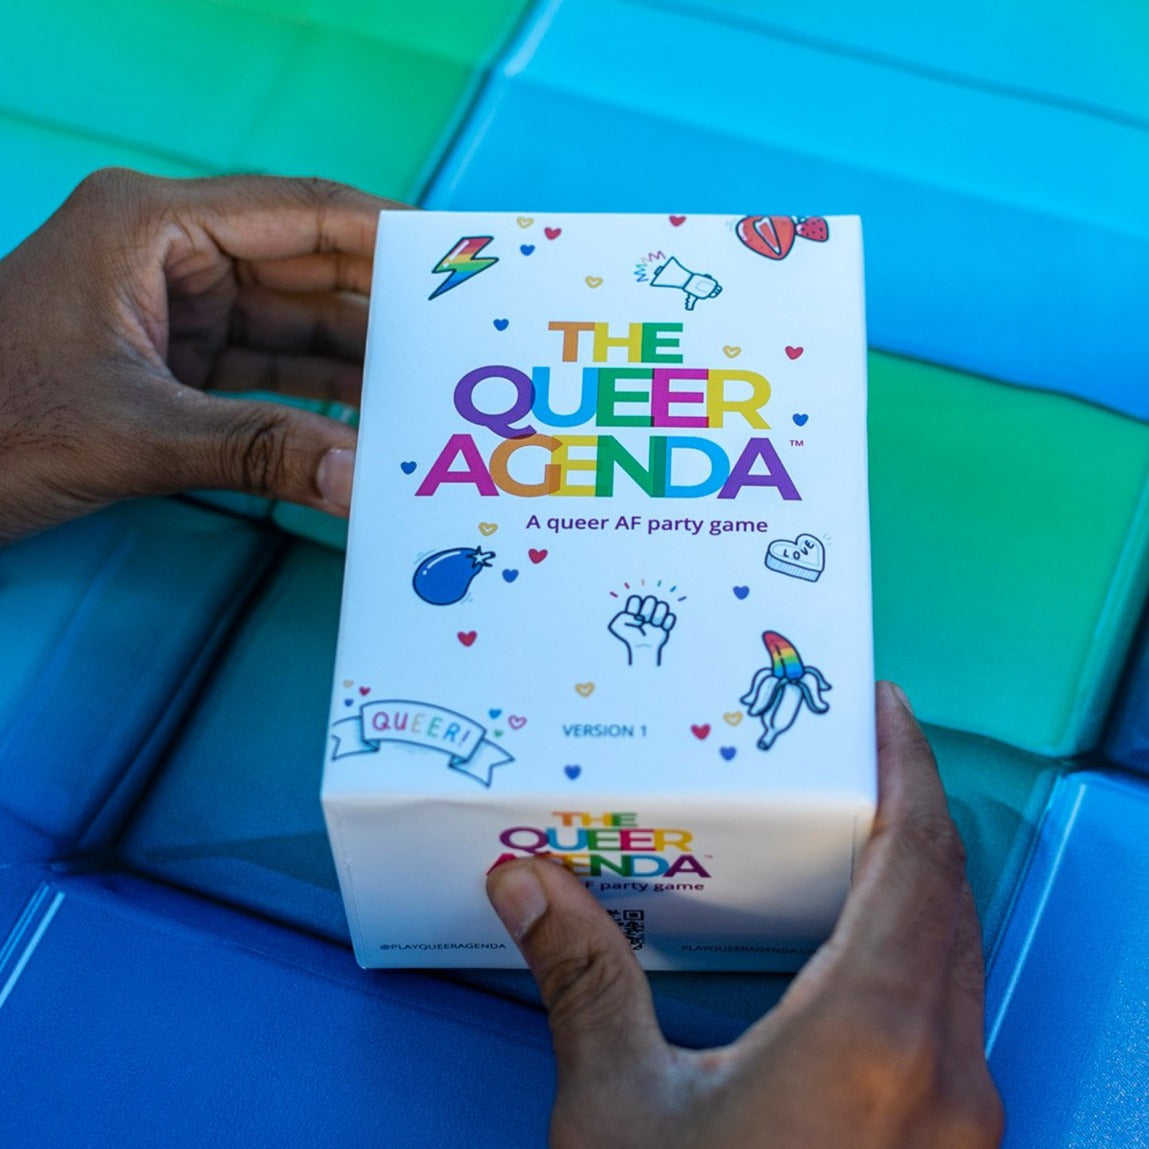 The Queer Agenda® - Dares Expansion Pack